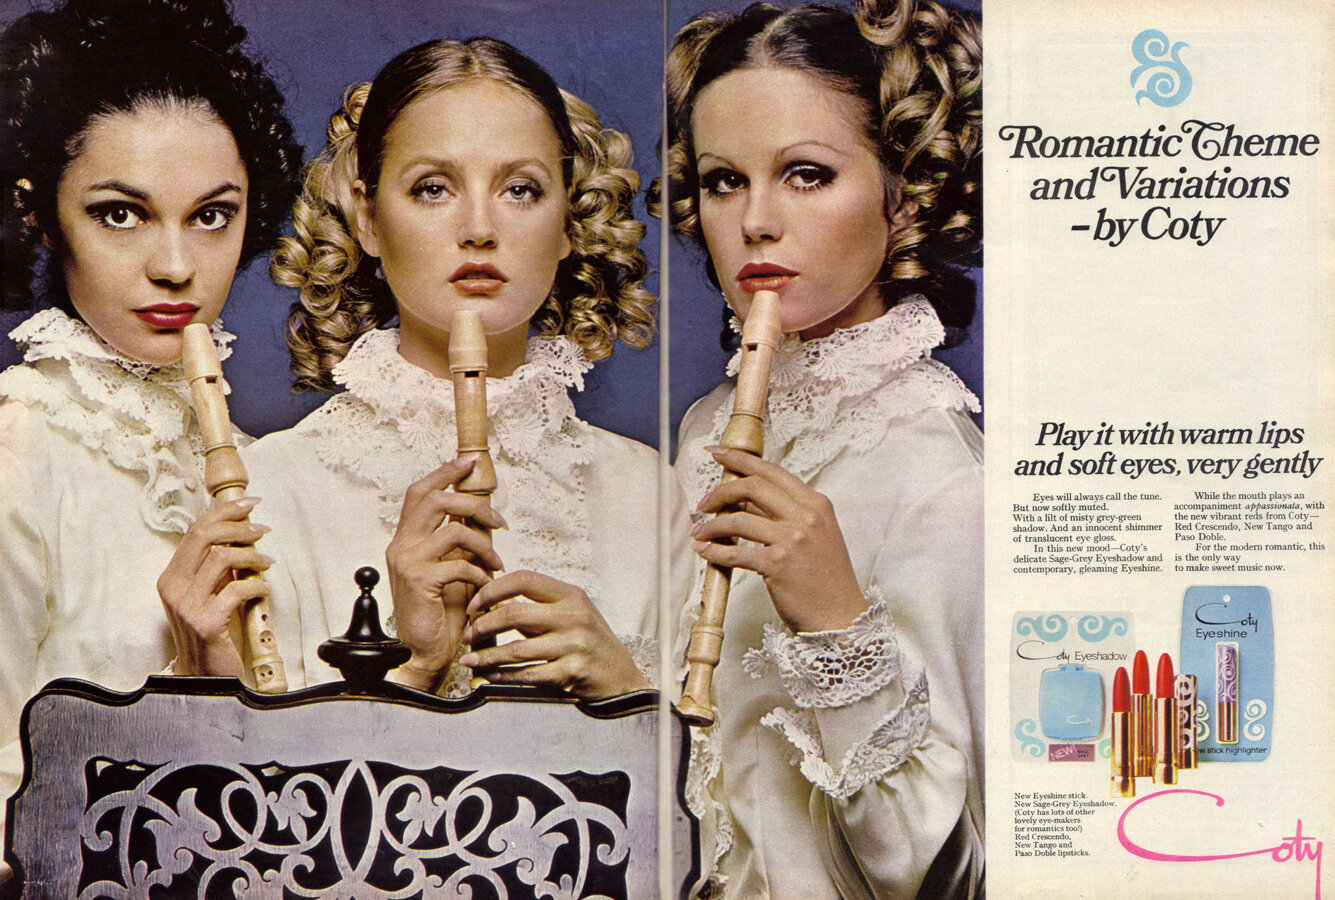 Ingrid (center) with Joanna Lumley (right) in a Coty makeup ad, 1968.